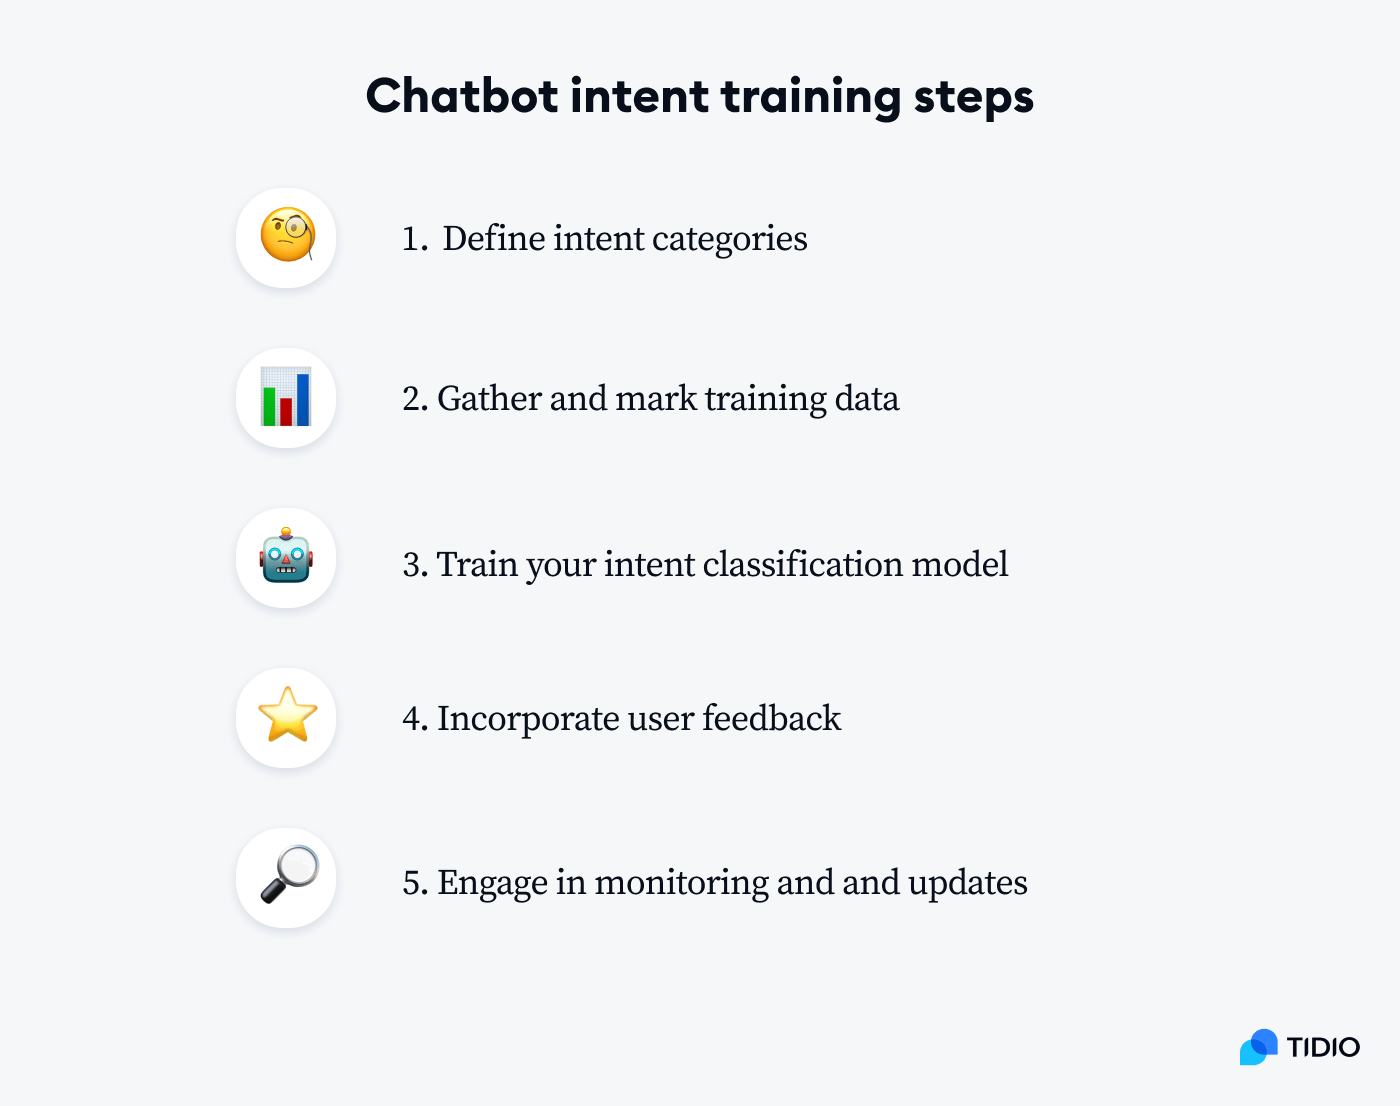 Steps for chatbot intent training on image